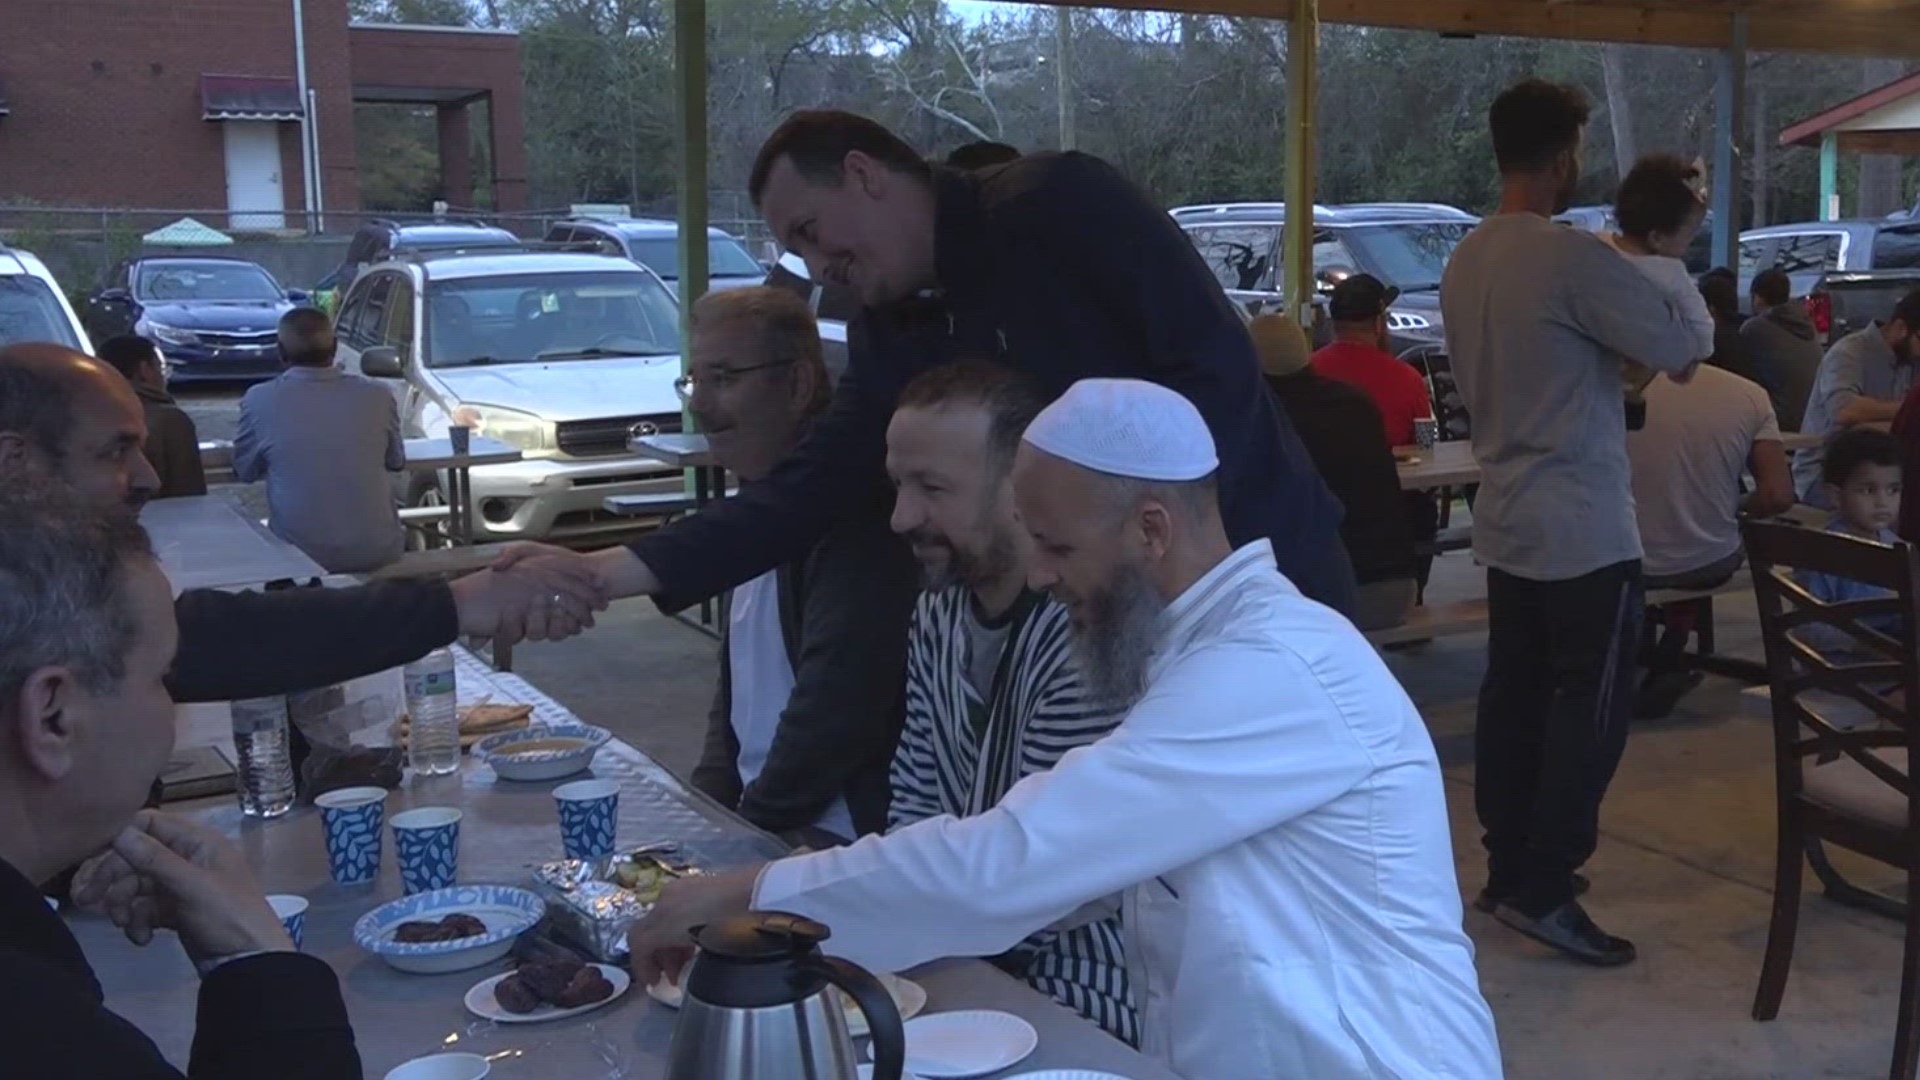 Local groups of Muslims are gathering for thirty days to celebrate the Islamic holiday and fellowship with each other in Columbia, South Carolina.